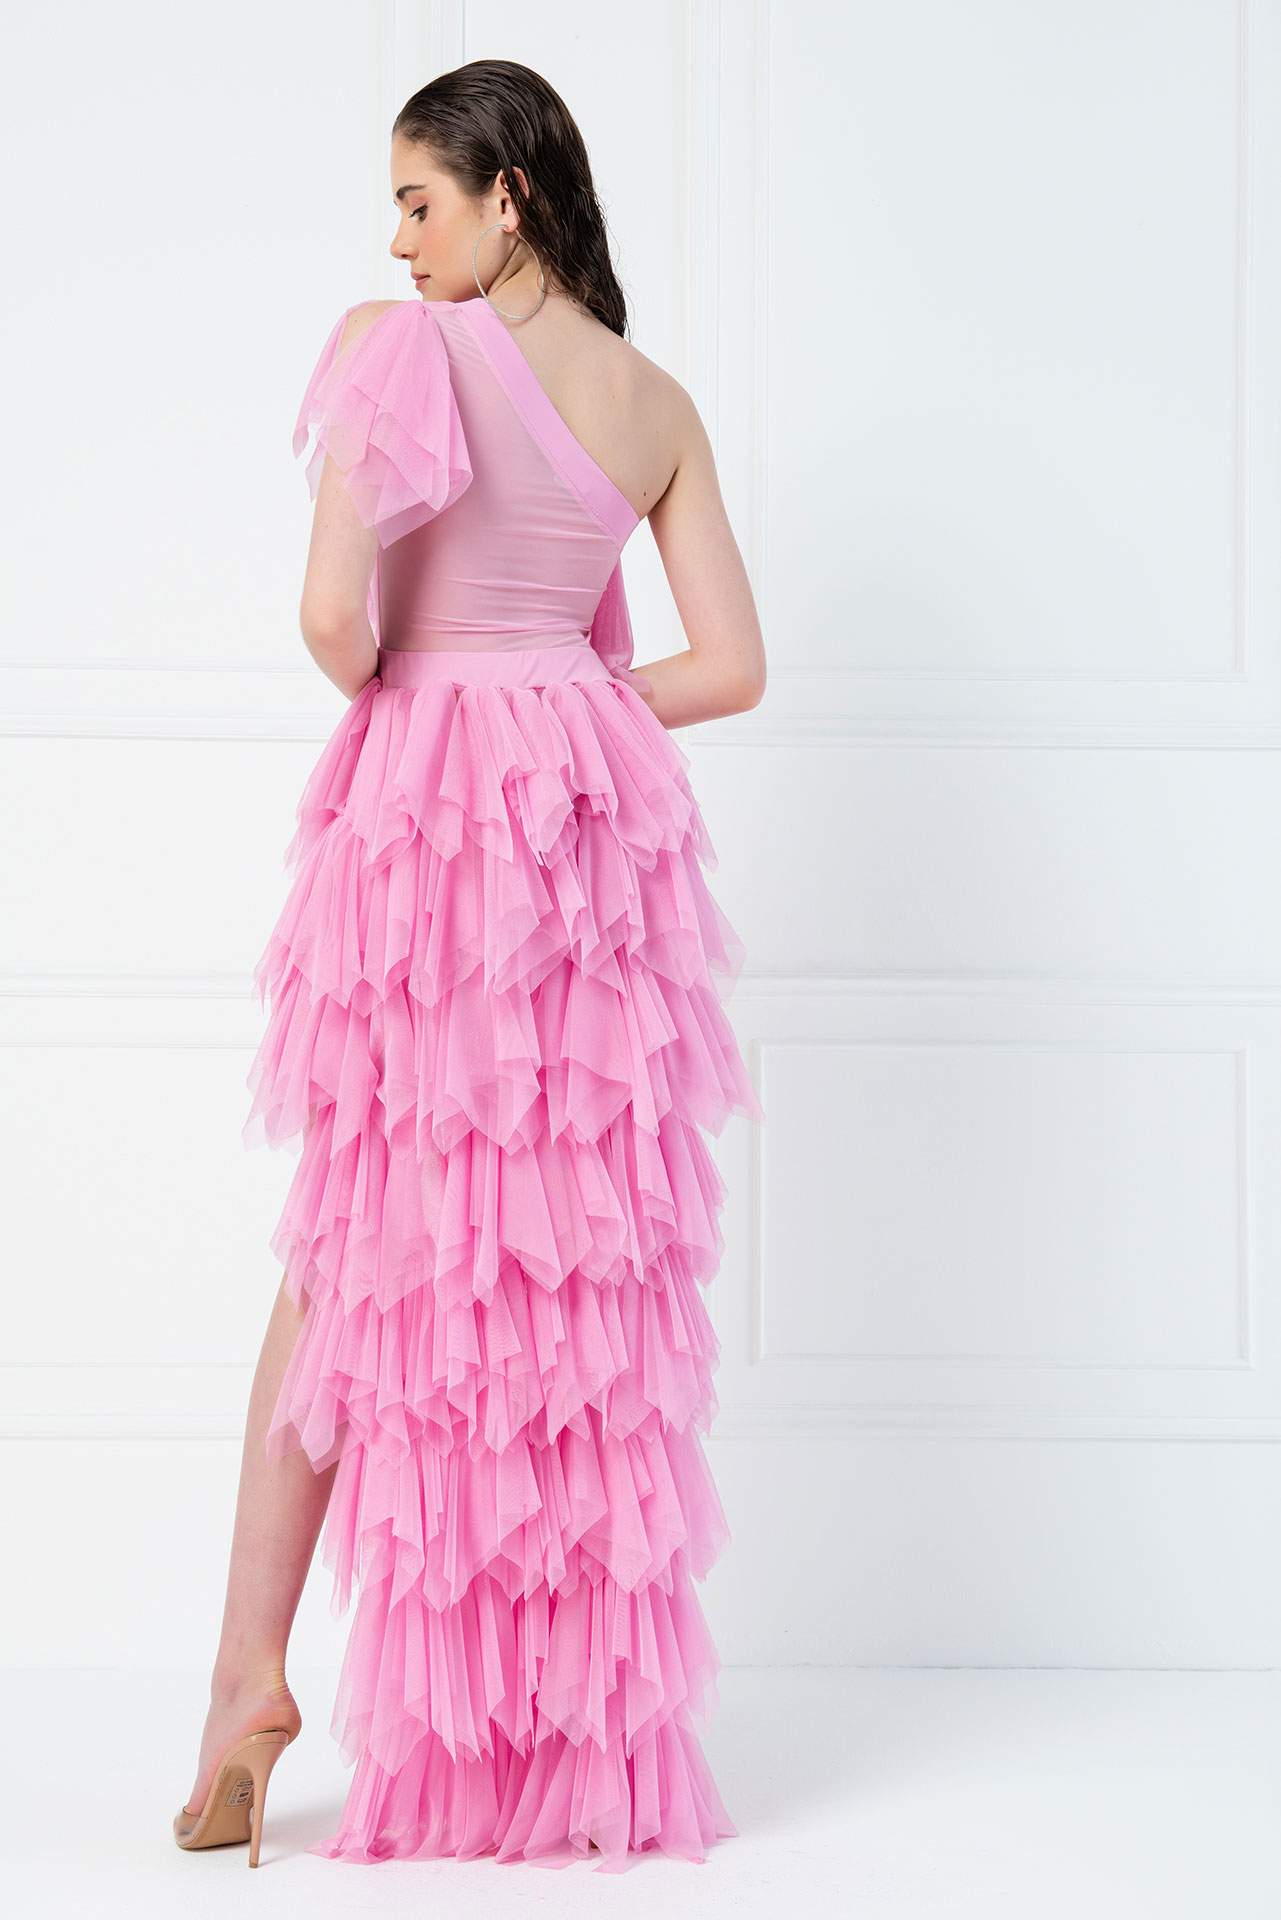 One Shoulder Ruffle Pink Mini Tulle Dress